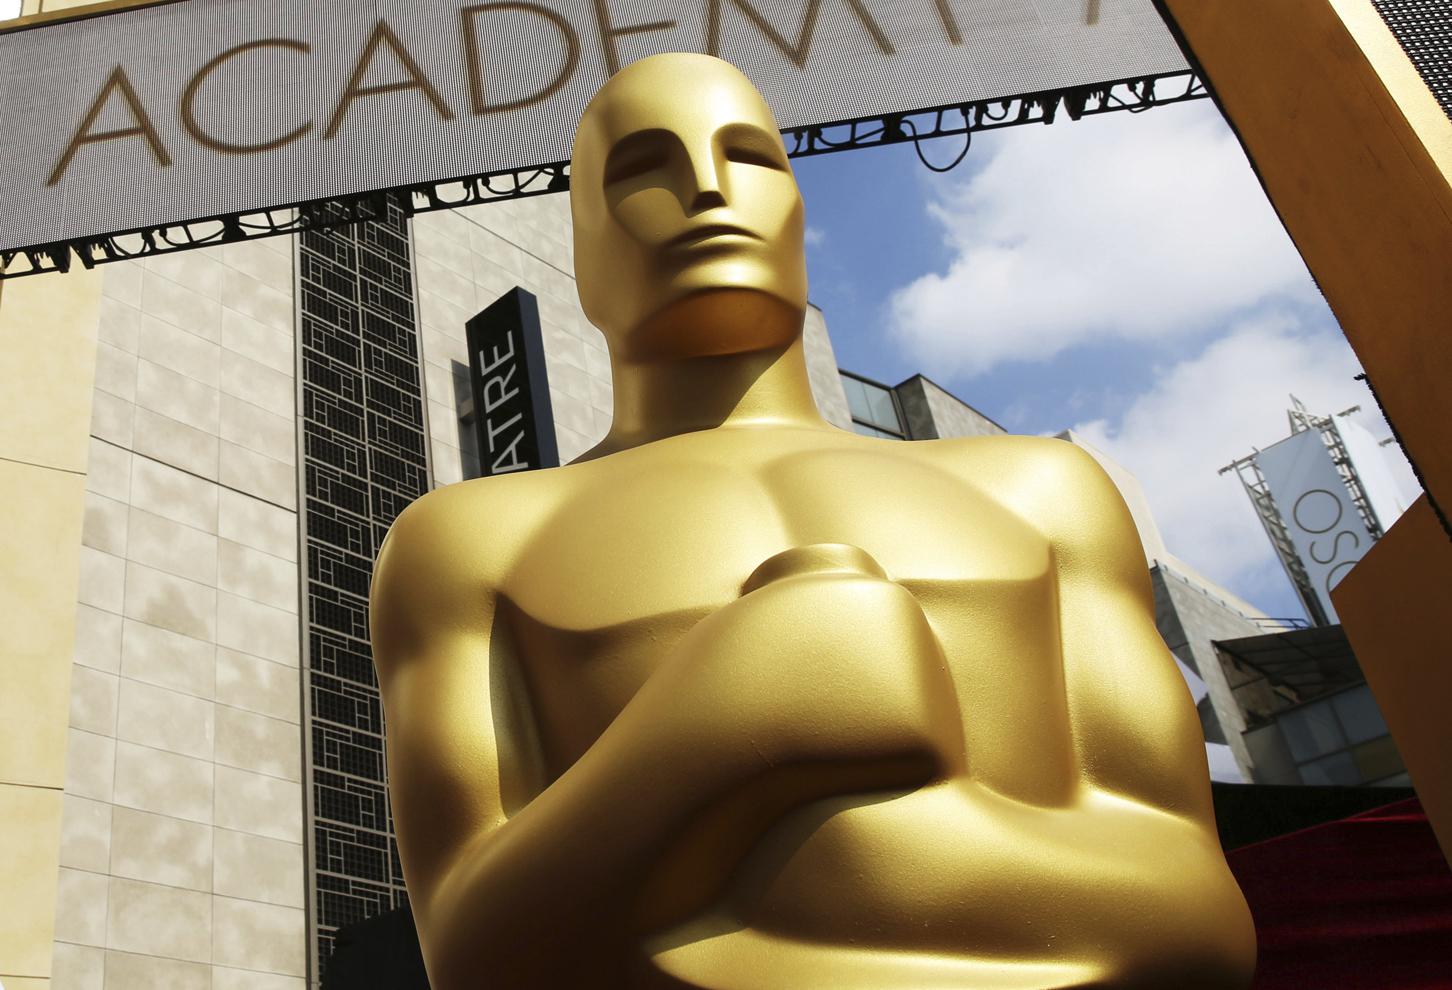 Oscar winners: How did the Reel Dad’s prediction’s measure up? - Milford Mirror1452 x 990